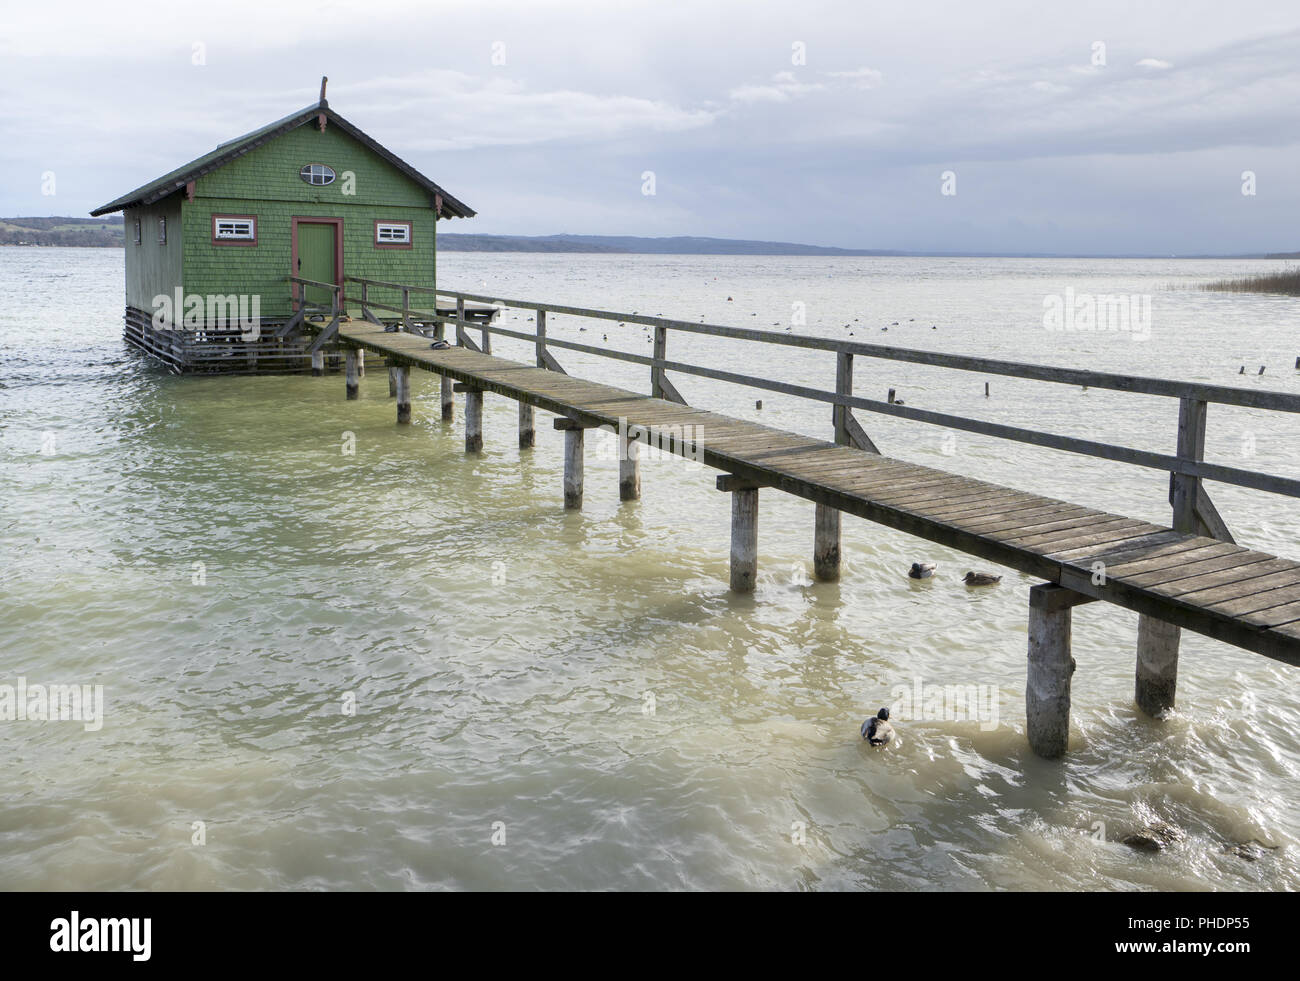 Old wooden pier and hut at lake Ammersee in Germany Stock Photo